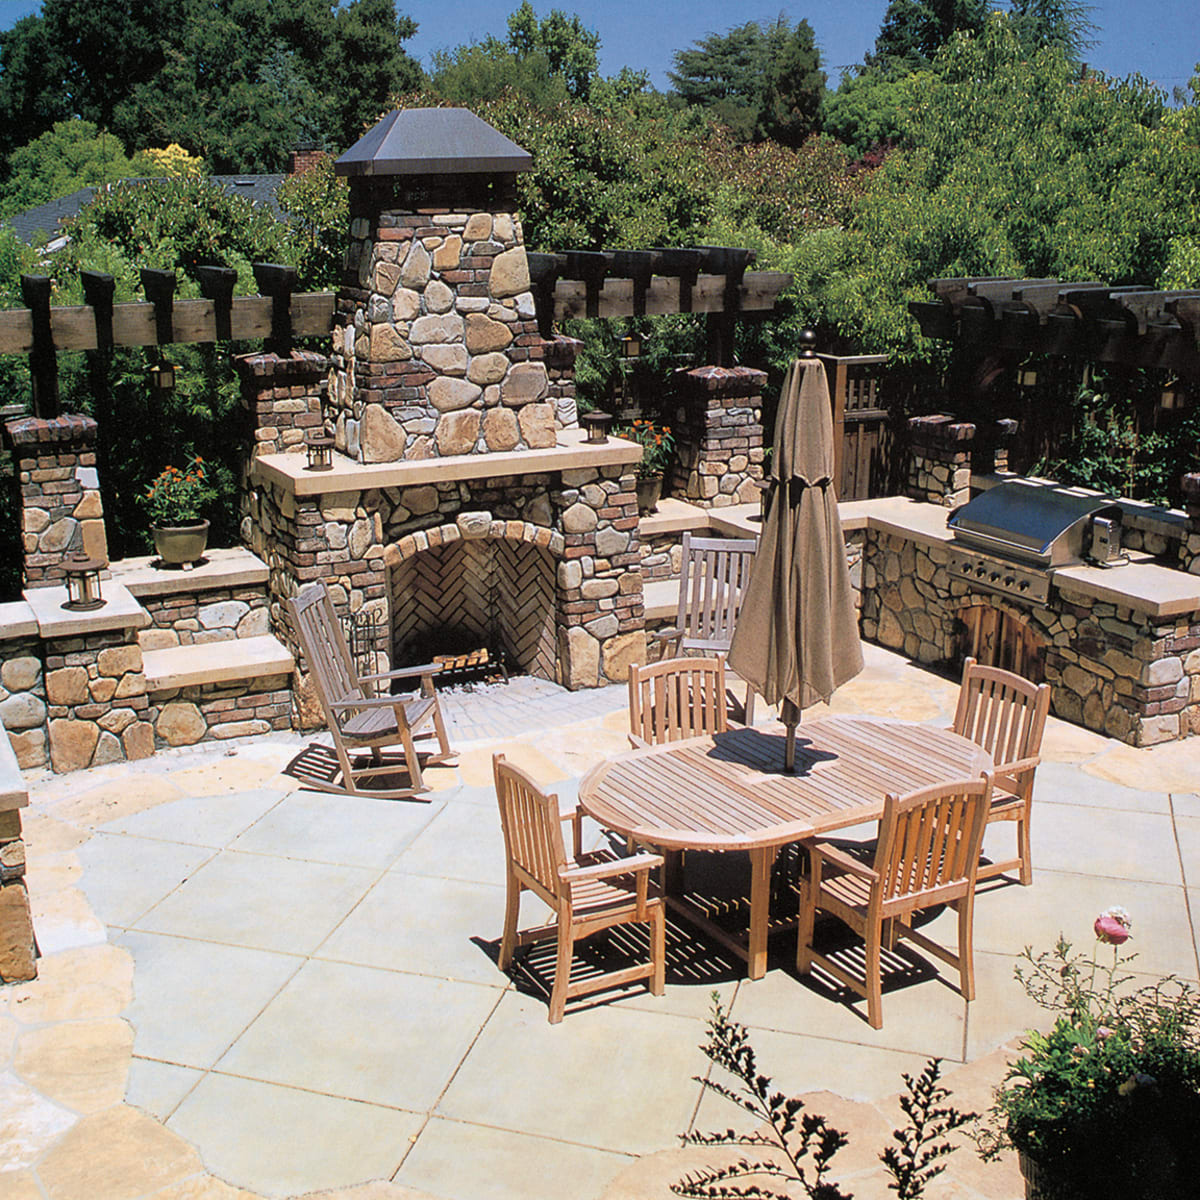 The Outdoor Hearth Fire Pit Barbecue, Spanish Revival Fire Pit